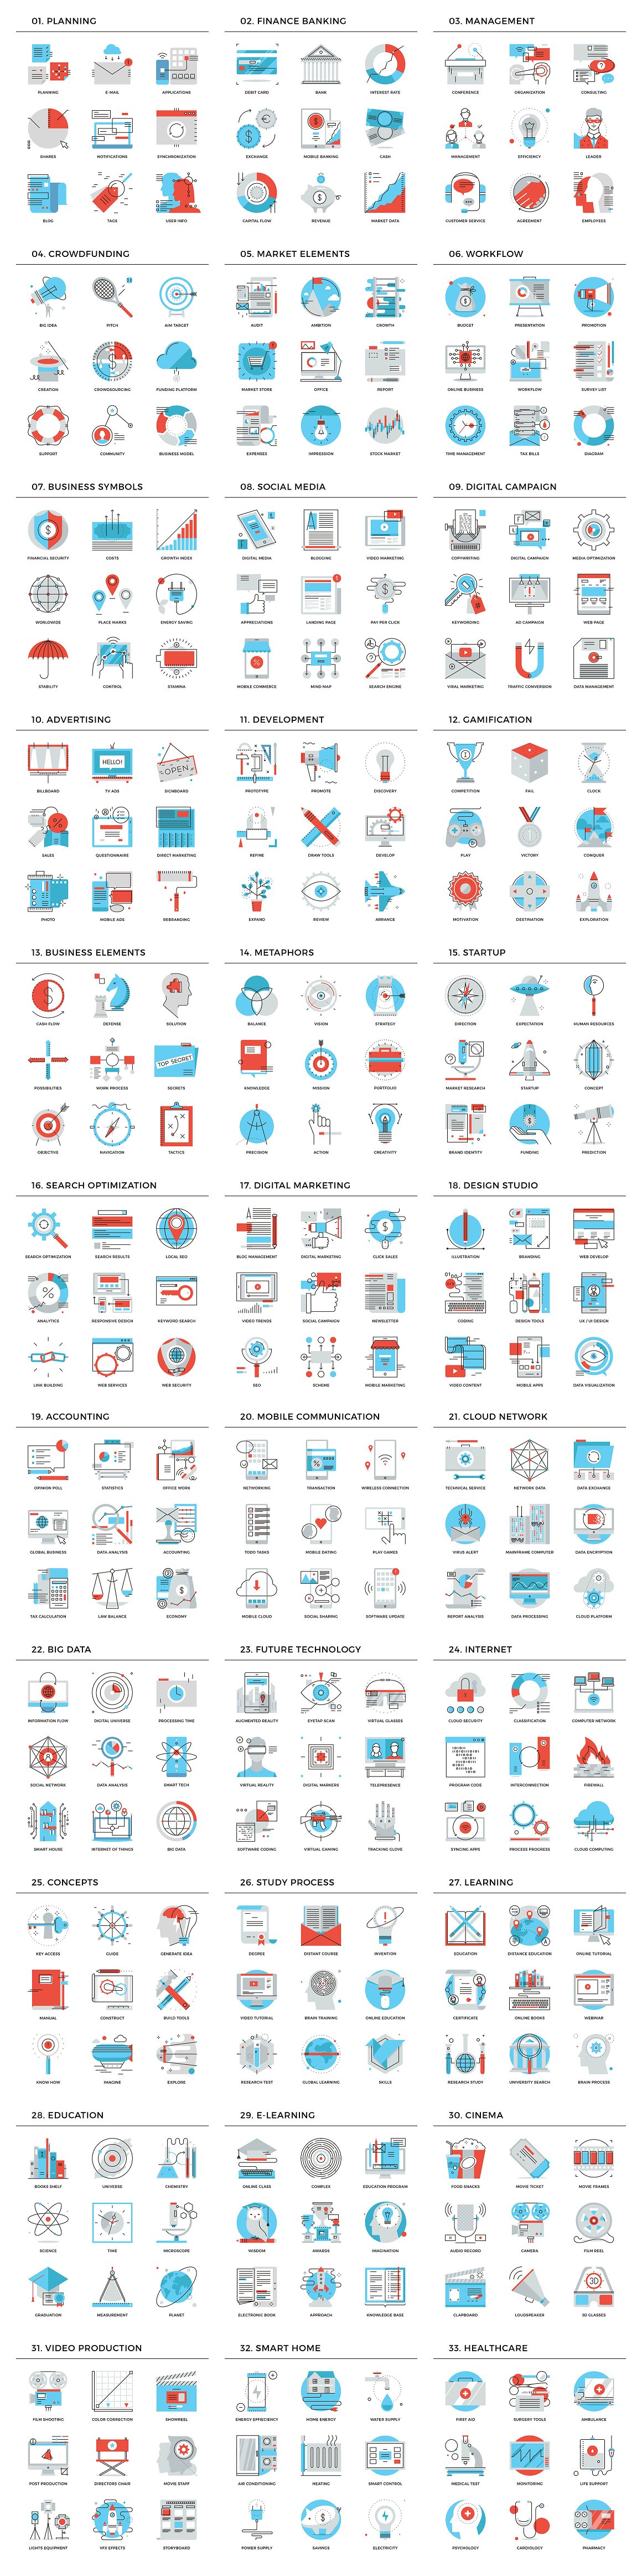 Collection of different colorful monoflat icons on a white background.